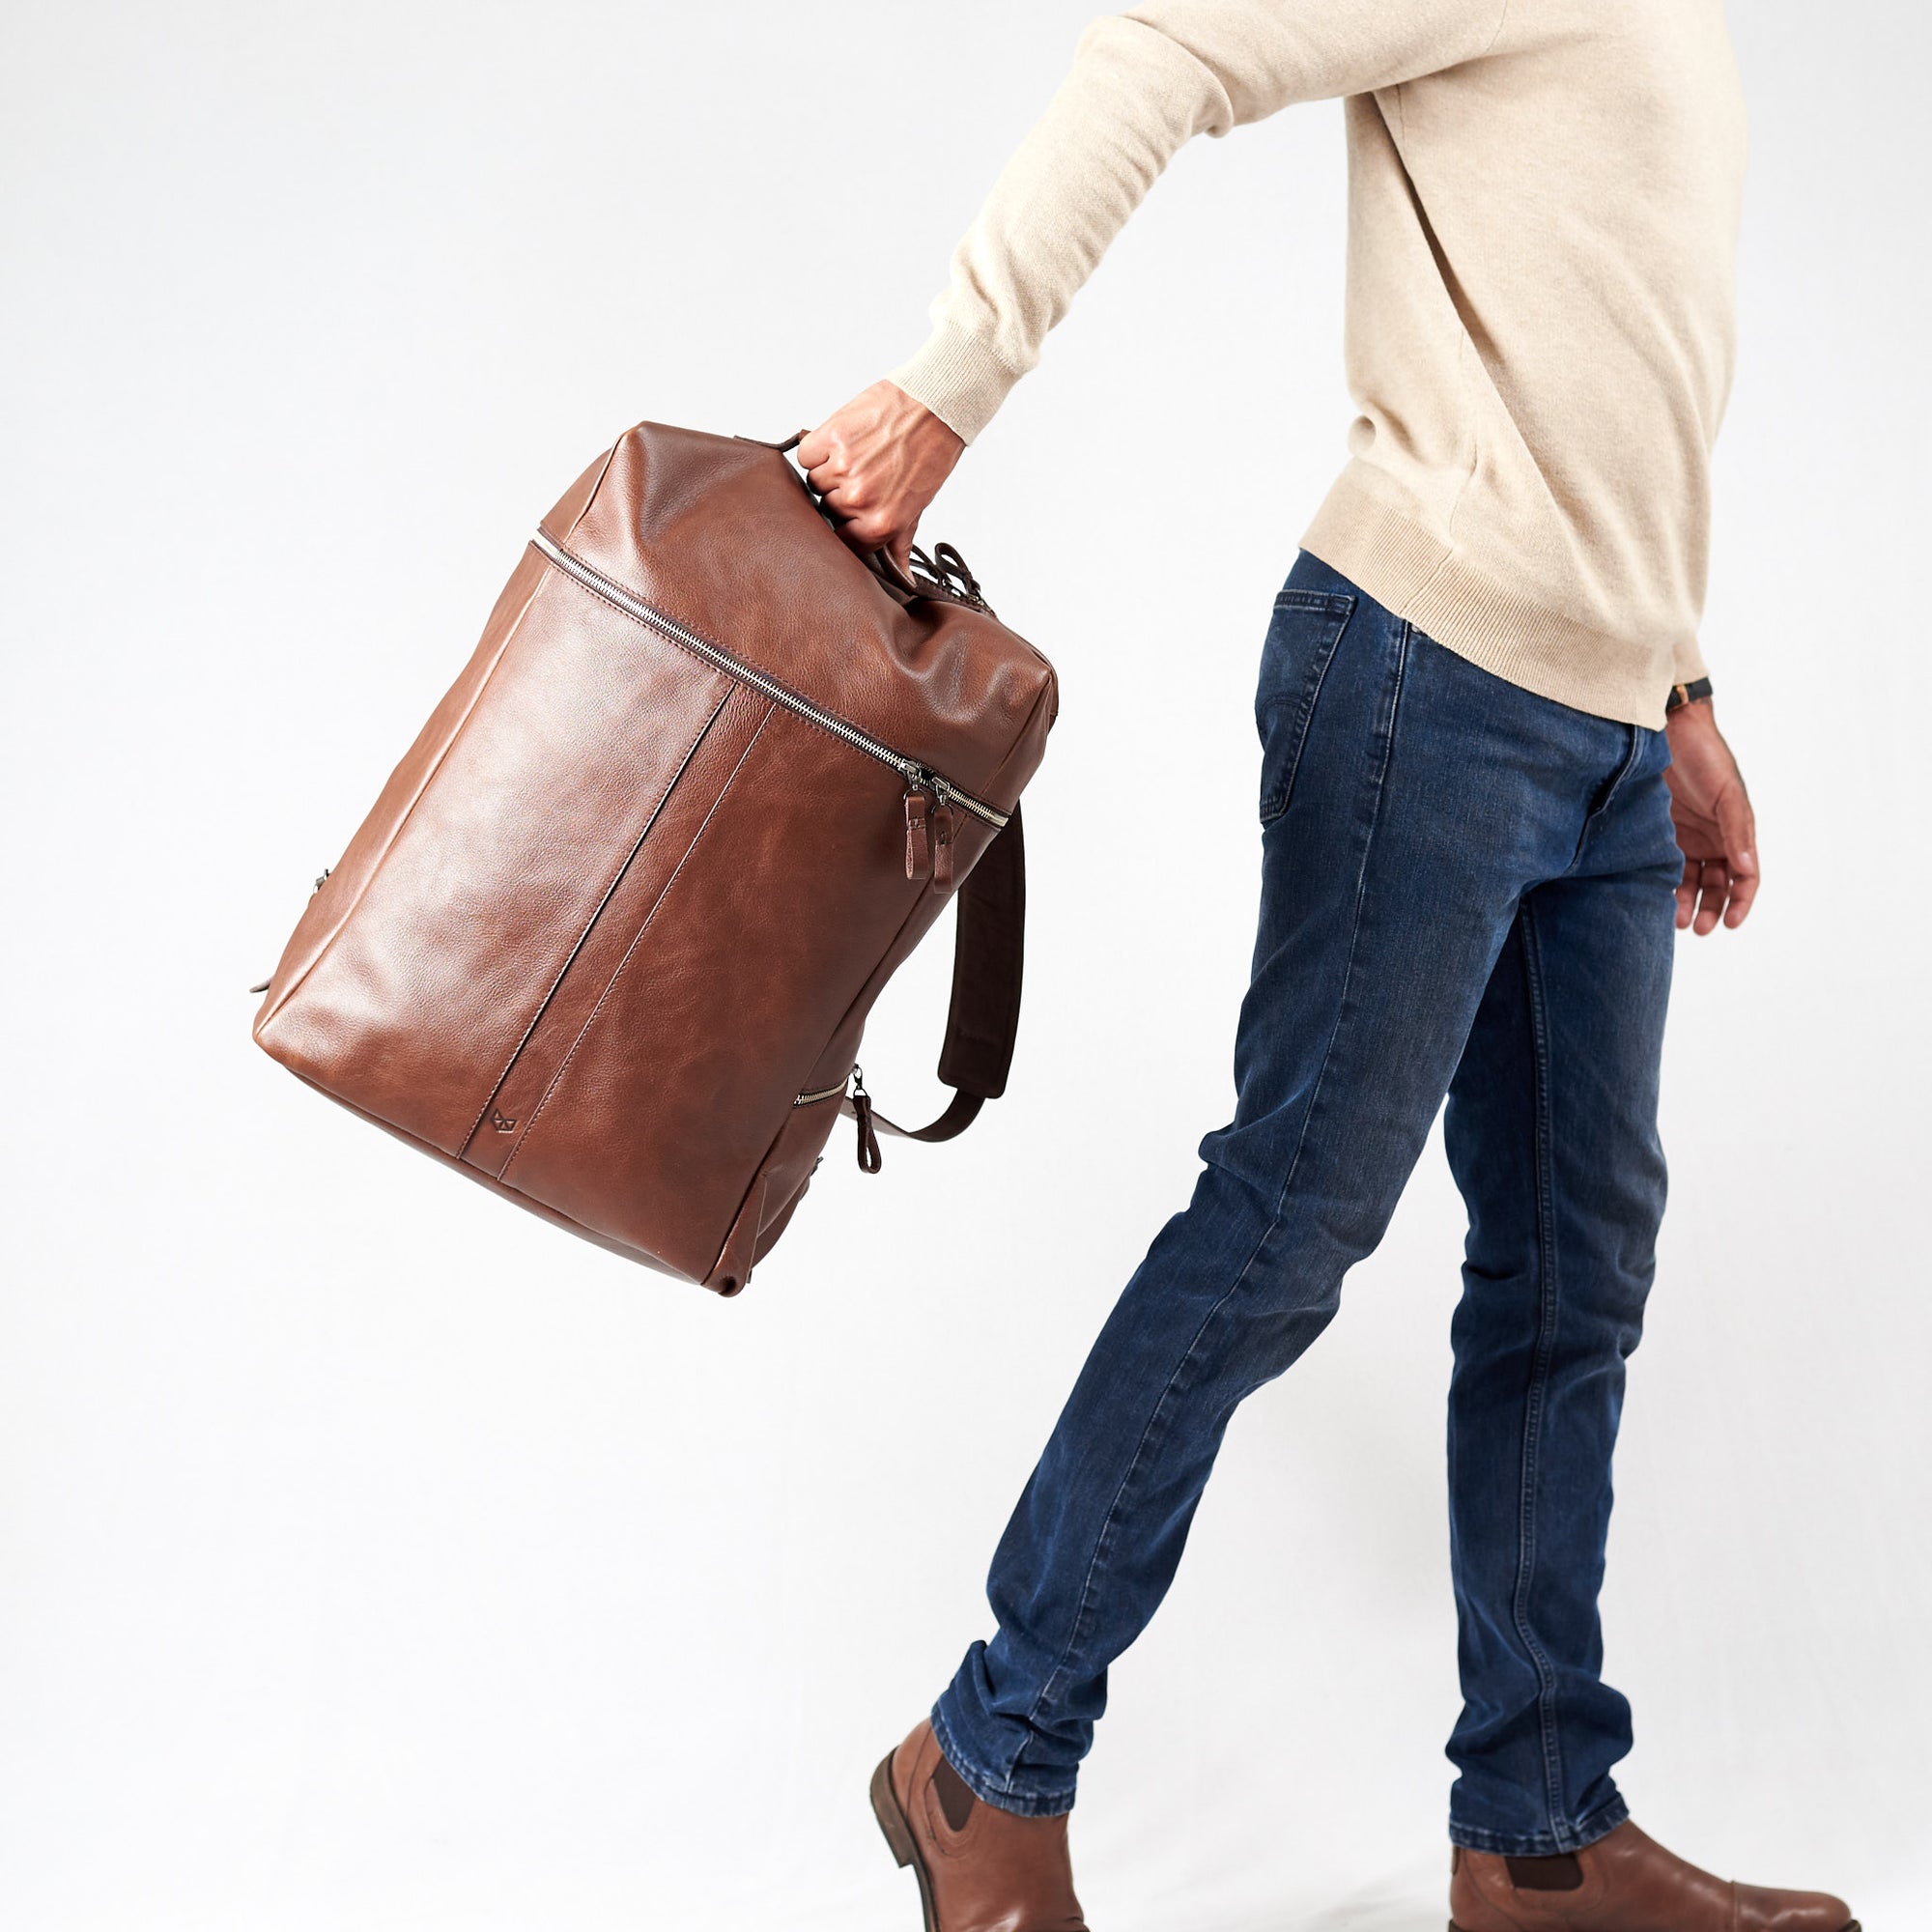 cool backpacks for men brown by capra leather